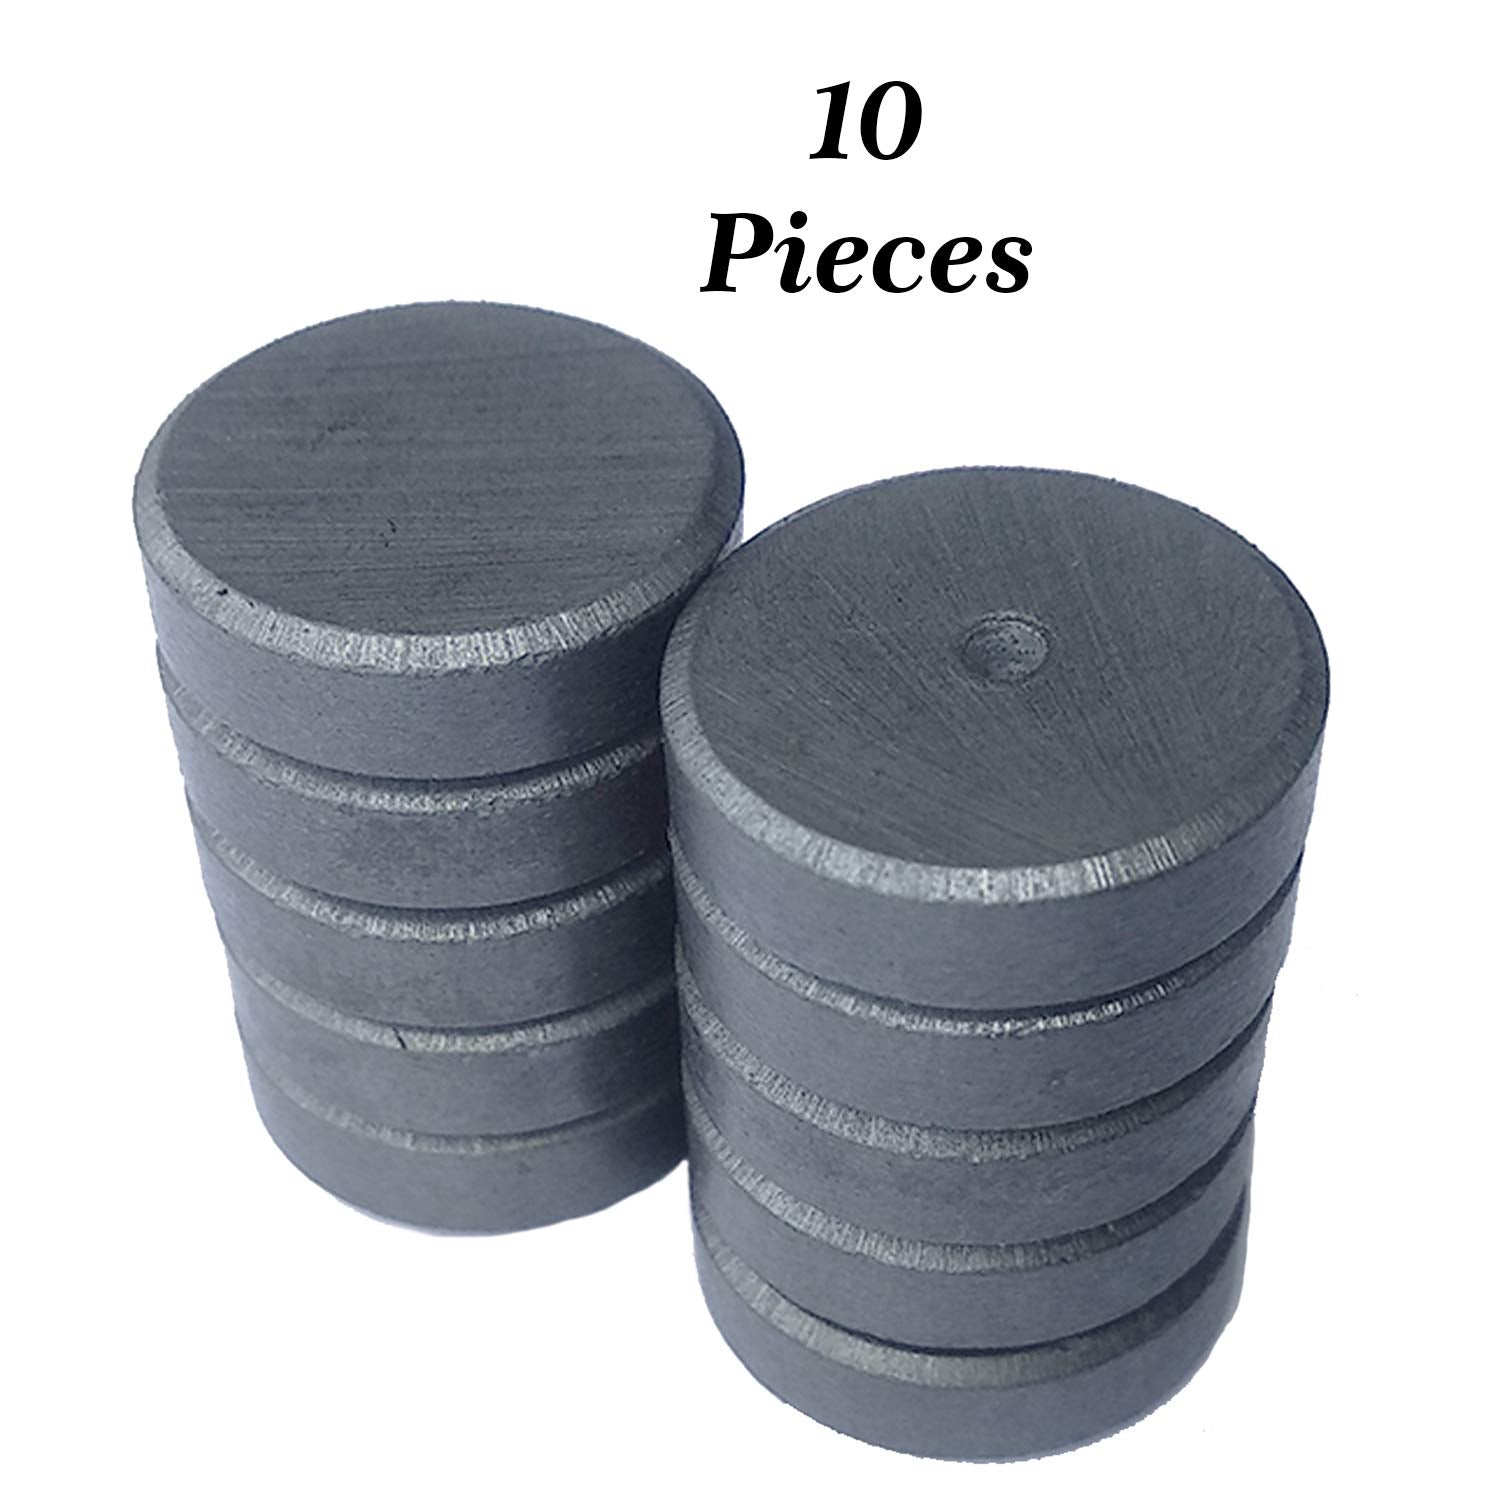 Ceramic/Ferrite Strong Magnets| Size: (18x5) mm, Industrial Powerful [Grade 11] LifeKrafts